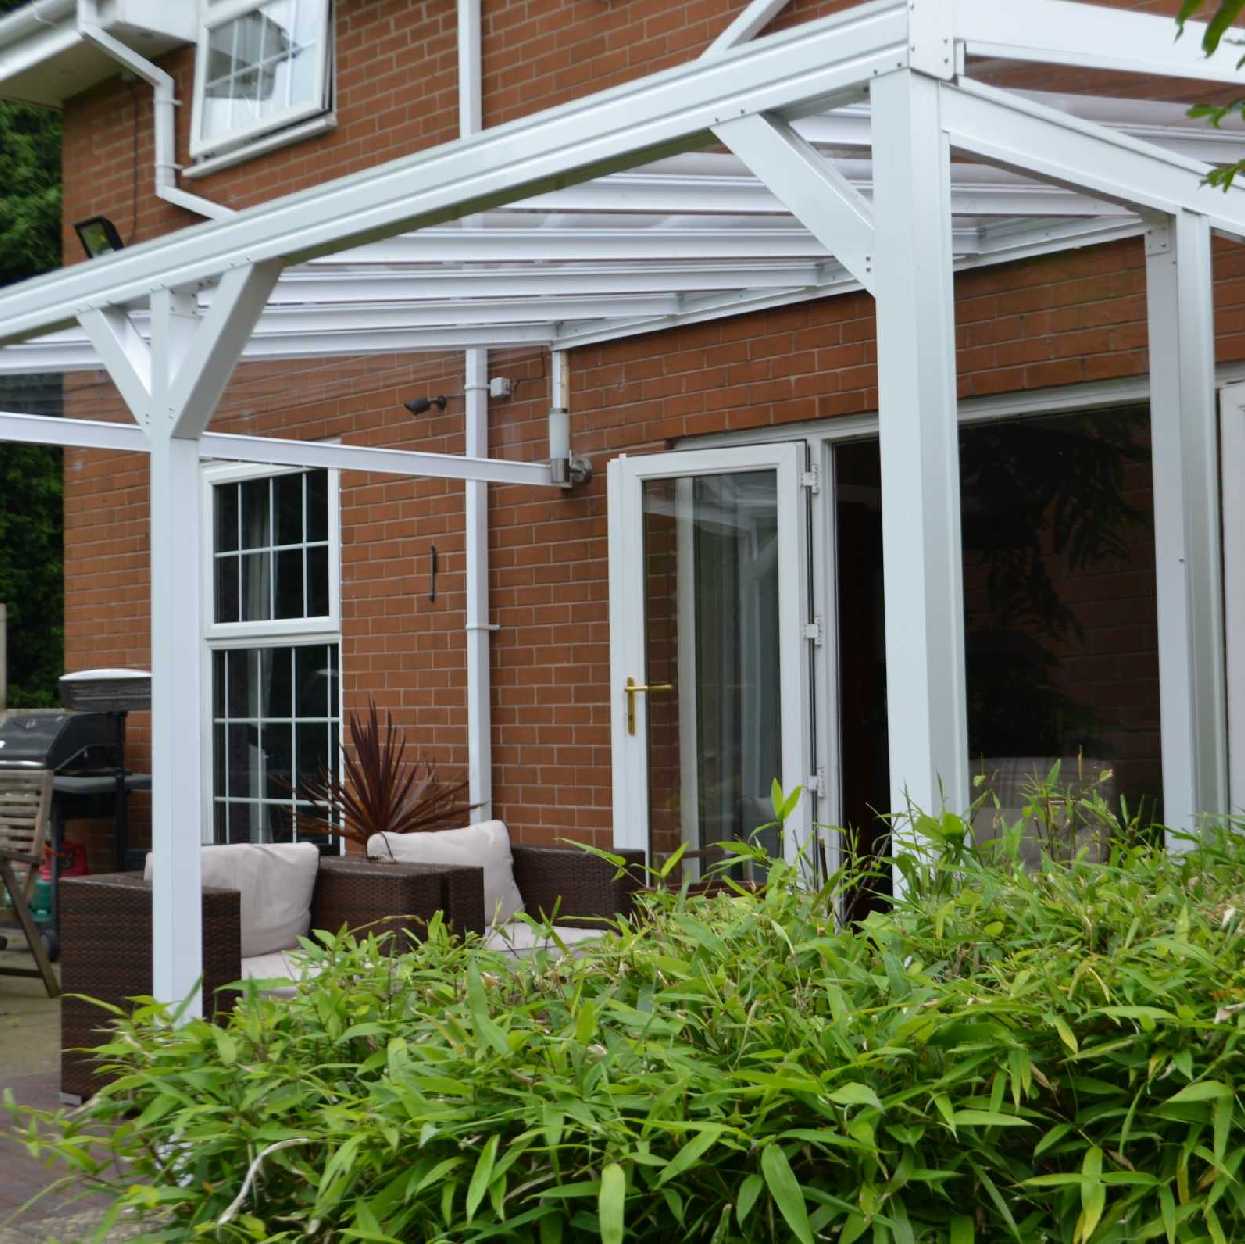 Omega Smart Lean-To Canopy, White UNGLAZED for 6mm Glazing - 10.5m (W) x 1.5m (P), (5) Supporting Posts from Omega Build